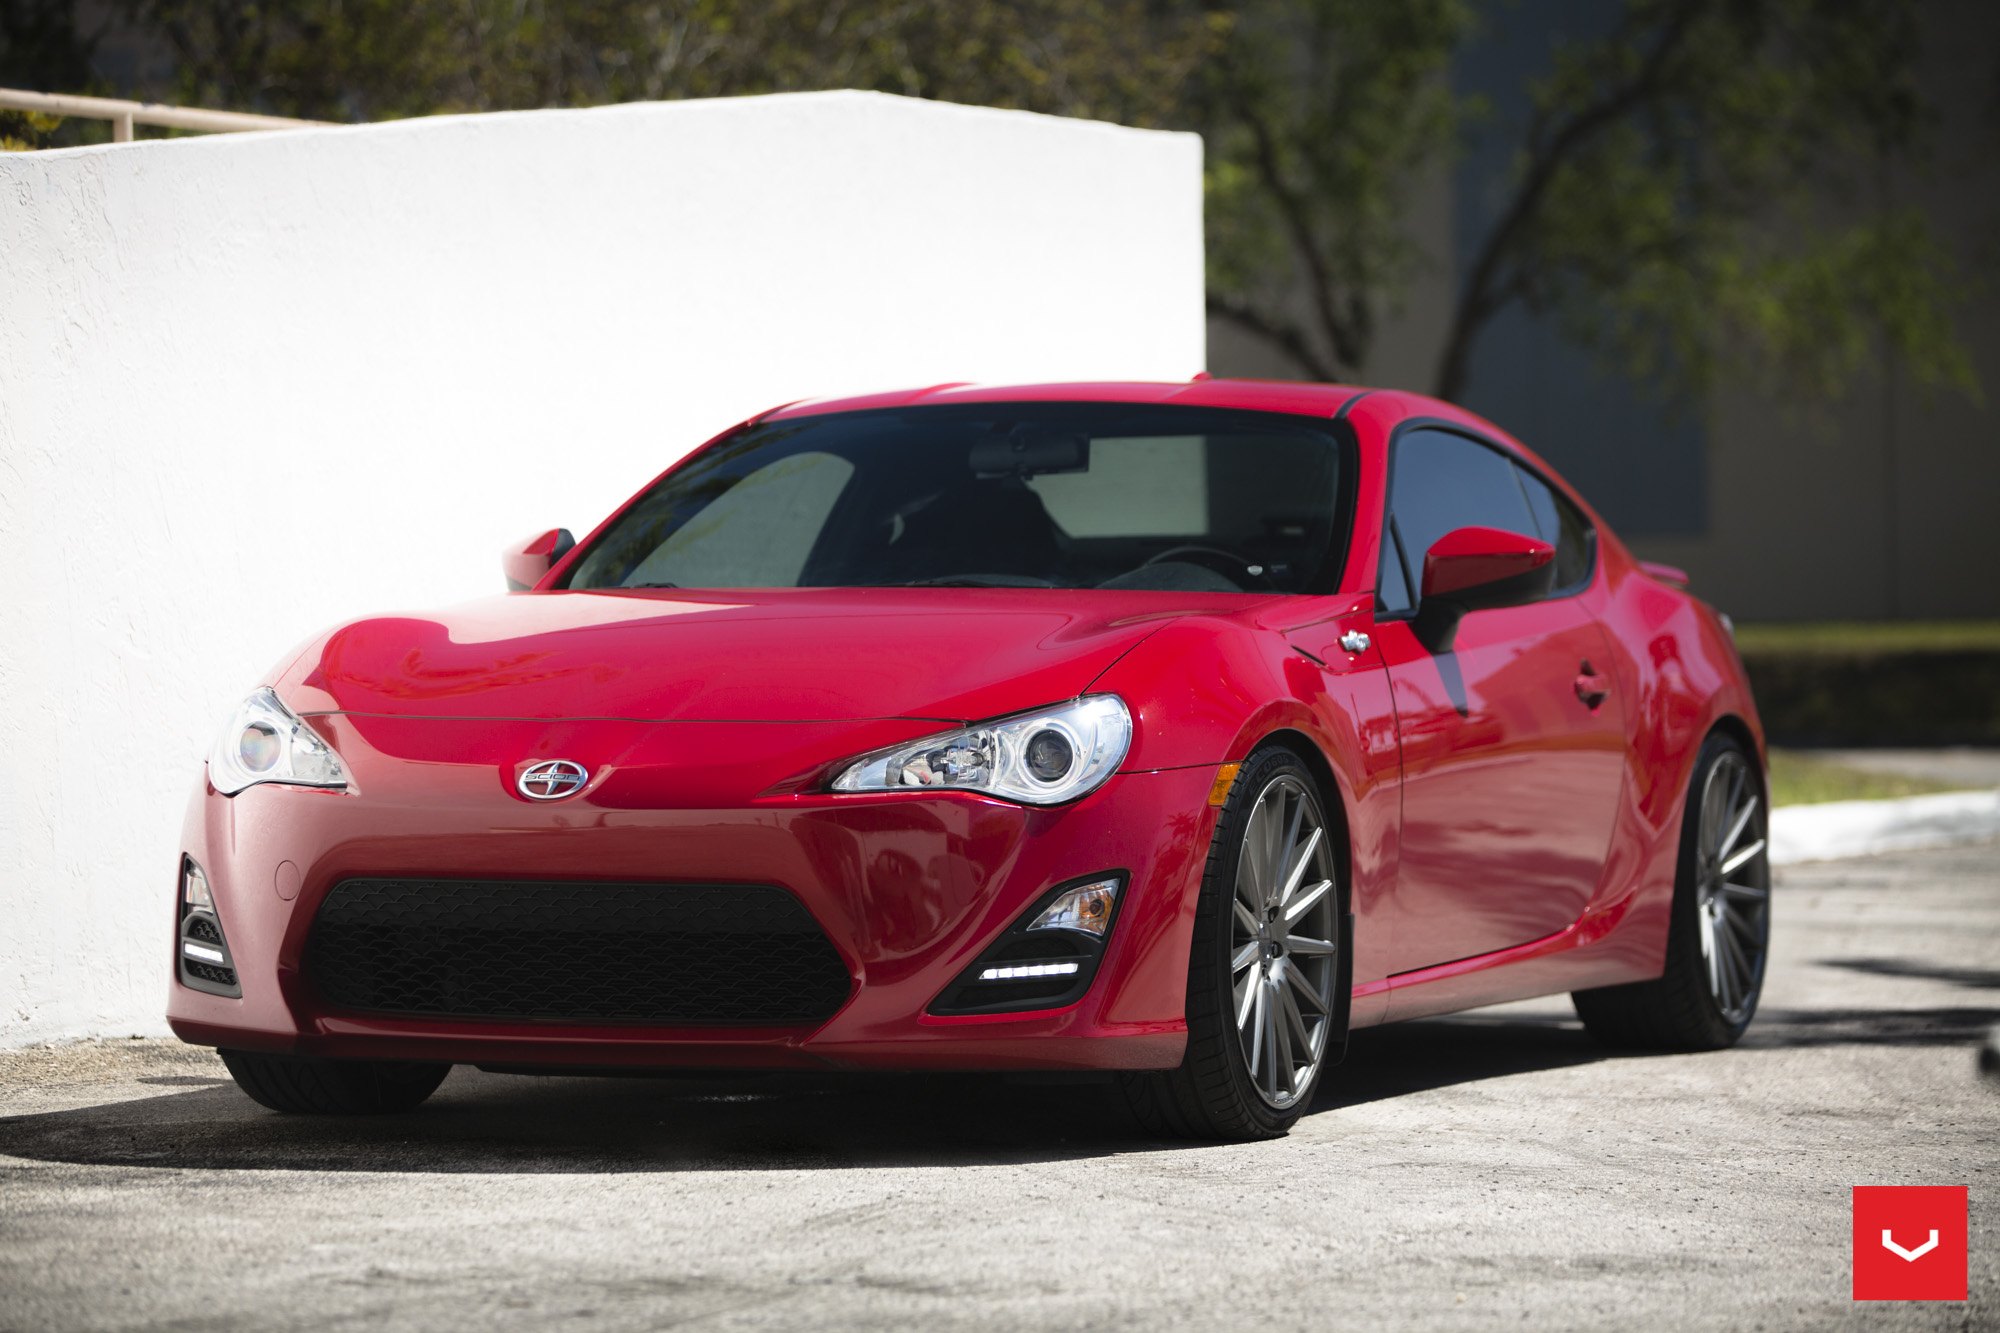 Red Scion FRS with Crystal Clear Headlights - Photo by Vossen